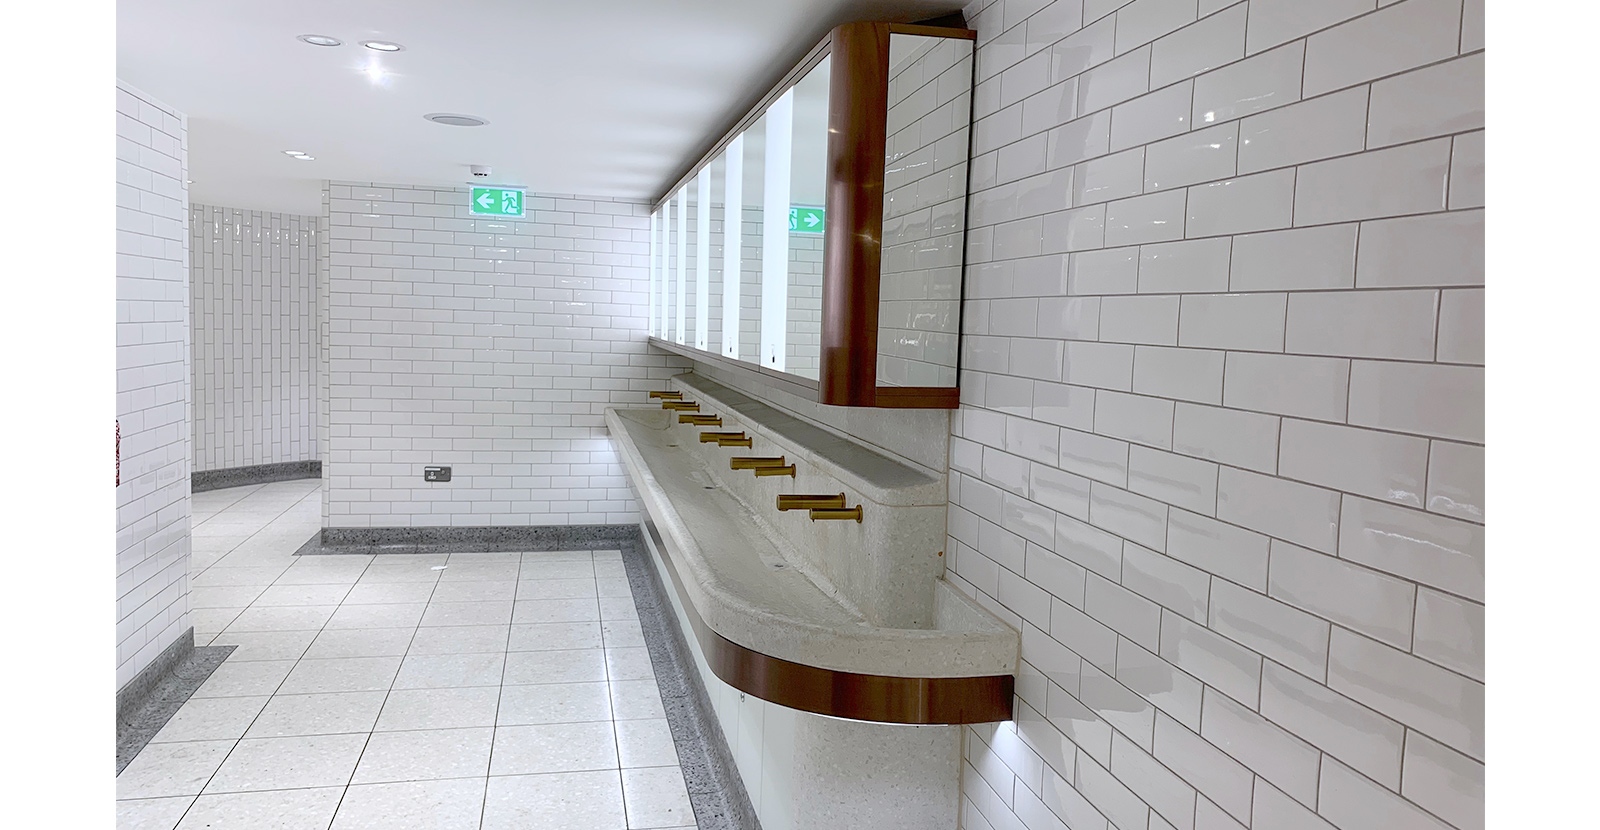 Communal sinks help to keep liquids in one place and floors dry and slip-free. London Victoria Rail Station WC. Architects Landolt + Brown, fit out contractor Maxwood Washrooms.